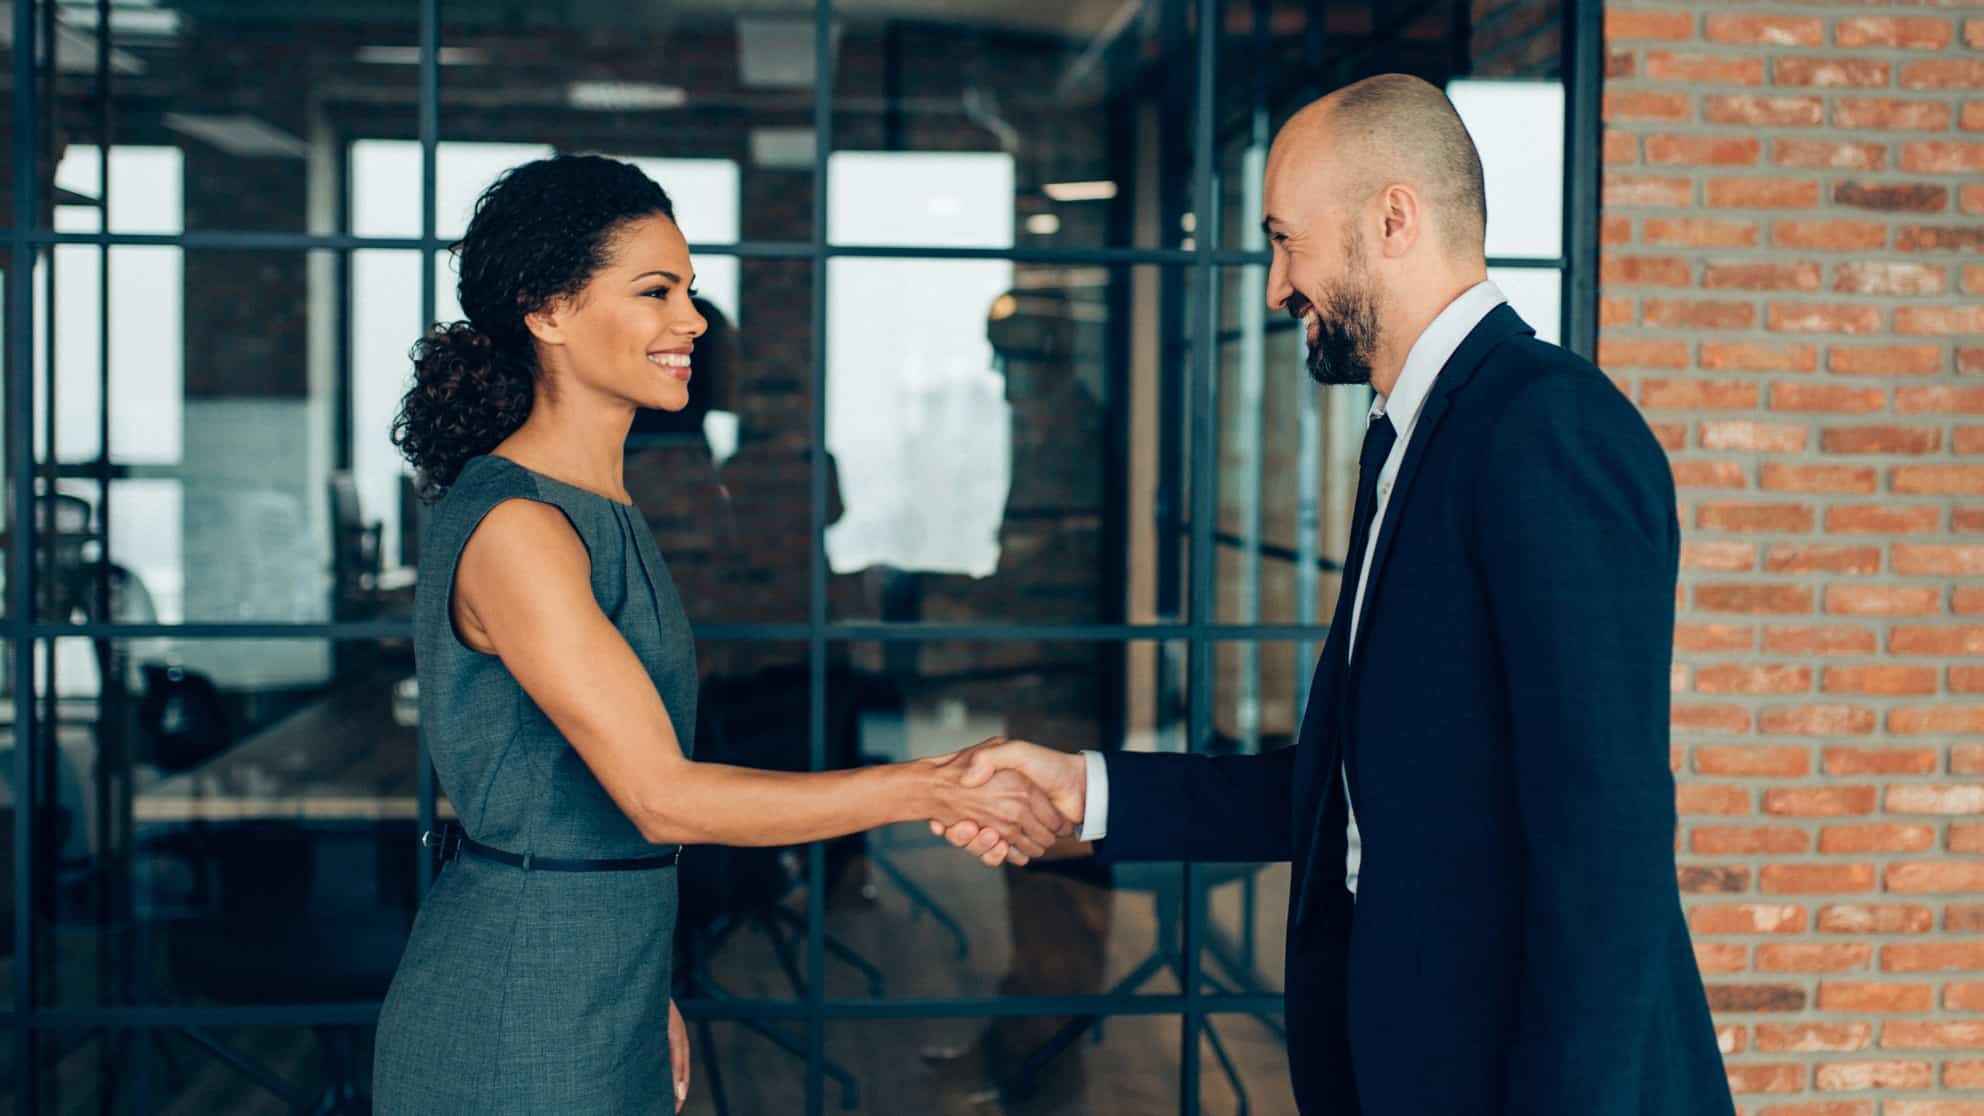 Man and woman shake hands on business deal